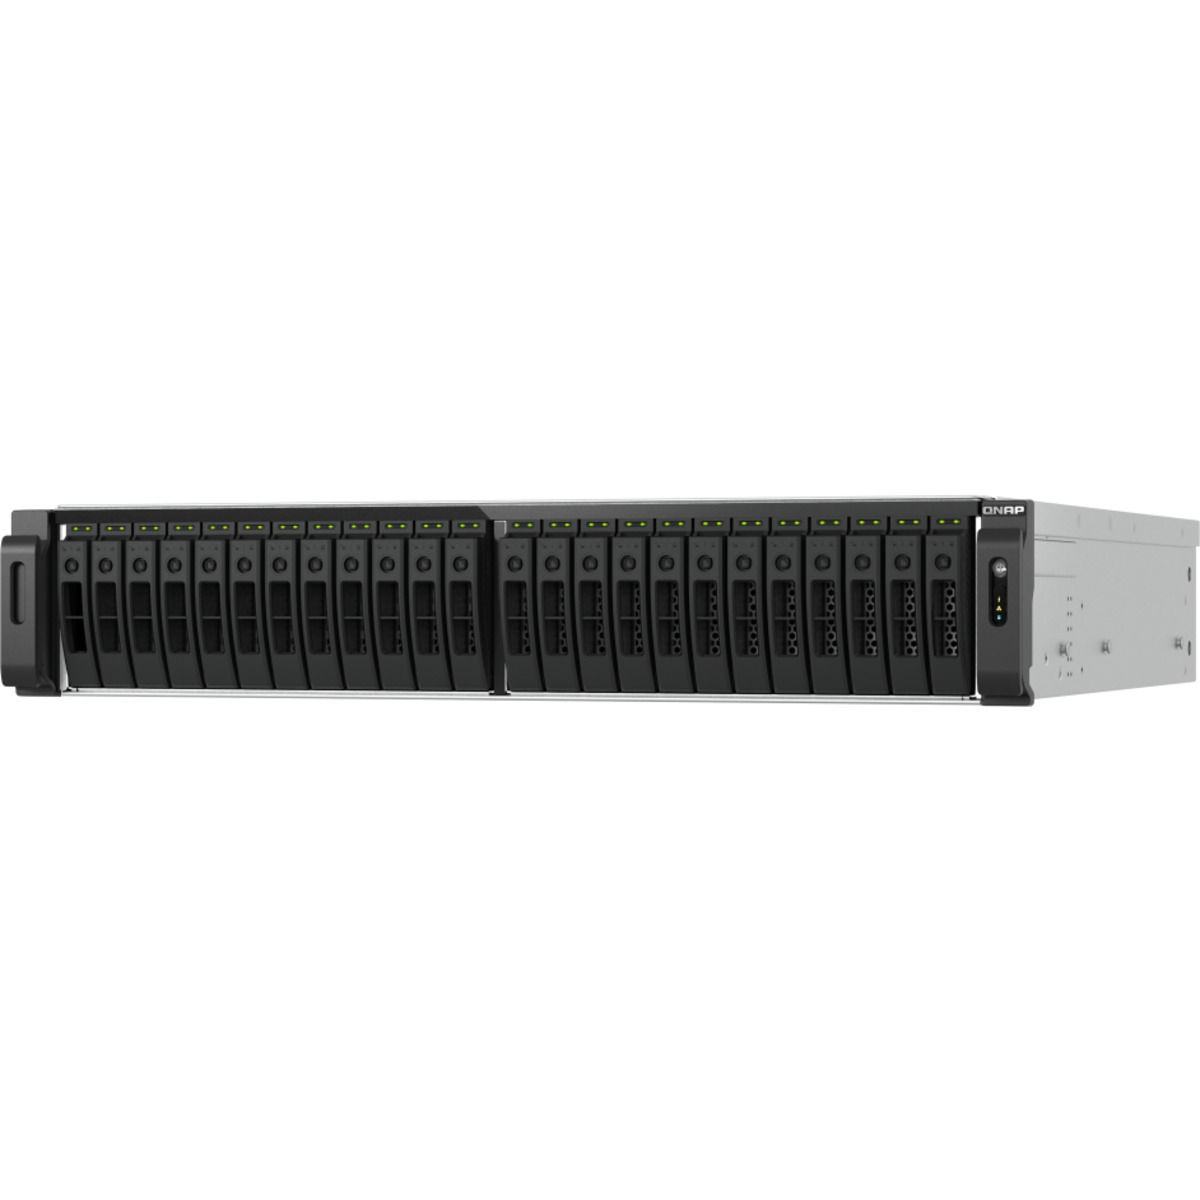 QNAP TS-h3077AFU Ryzen 7 All-Flash ZFS 112tb 30-Bay RackMount Large Business / Enterprise NAS - Network Attached Storage Device 28x4tb Crucial MX500 CT4000MX500SSD1 2.5 560/510MB/s SATA 6Gb/s SSD CONSUMER Class Drives Installed - Burn-In Tested TS-h3077AFU Ryzen 7 All-Flash ZFS